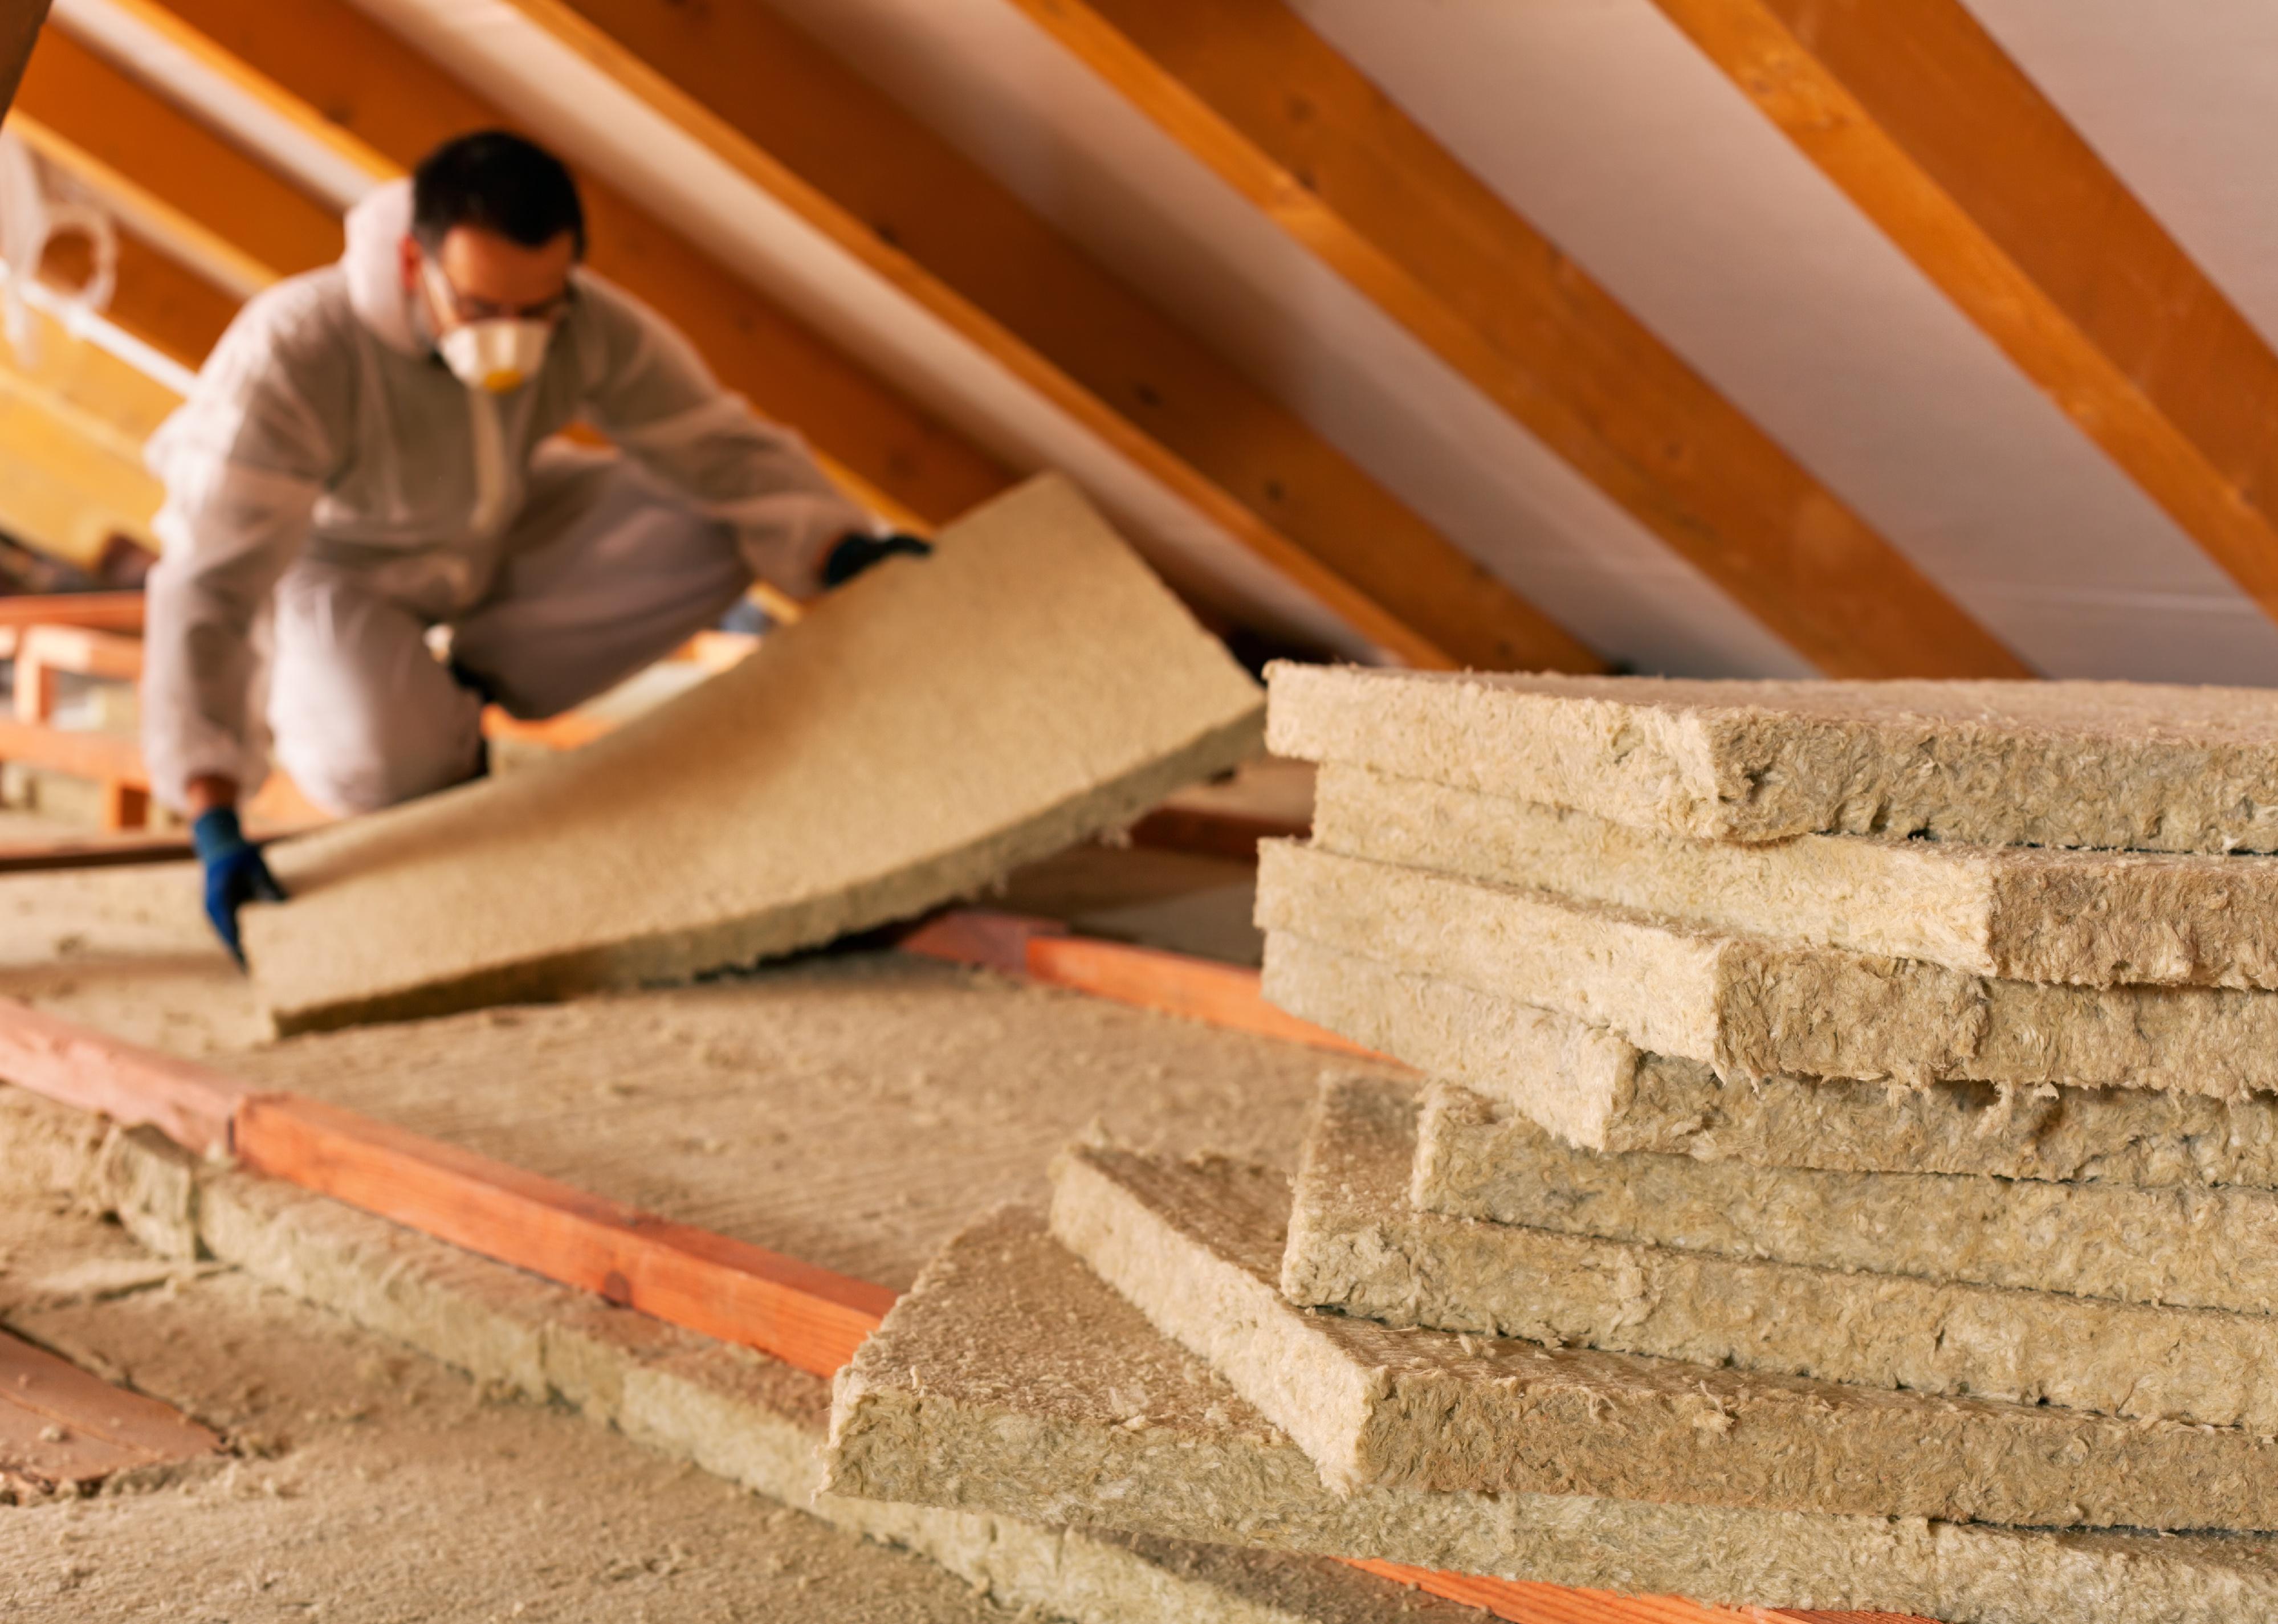 Worker installing insulation in an attic